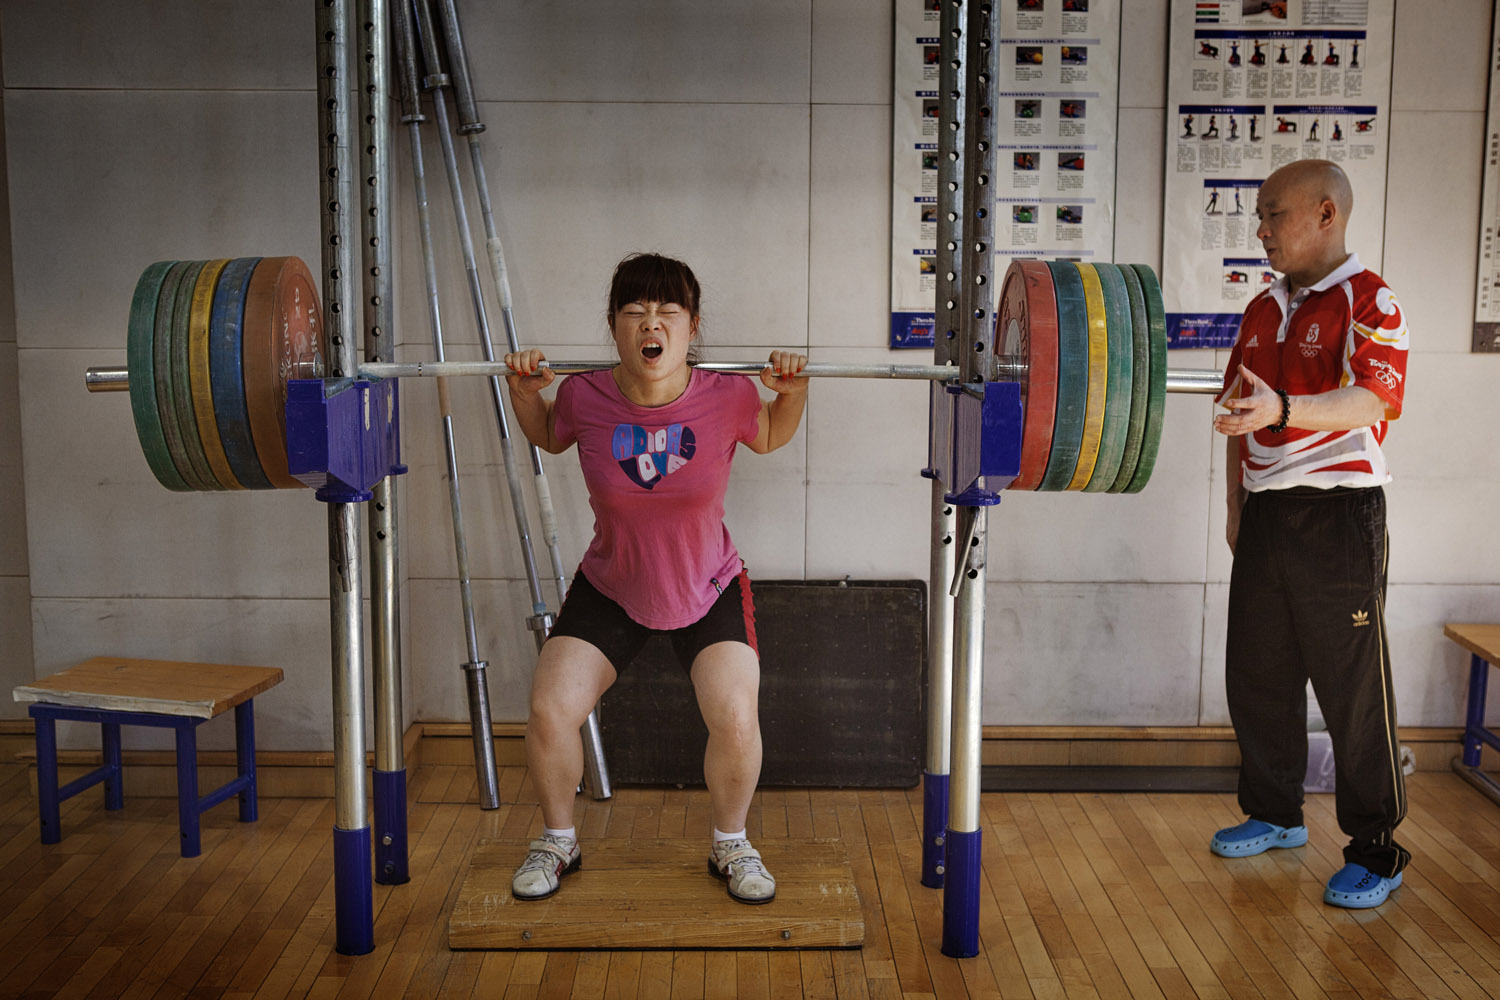 Wang Mingjuan tries out for the Chinese women's Olympic weight-lifting team at the national sports training center in Beijing. Weighing just 48 kg (106 lb.), Mingjuan nonetheless qualified for the team and is competing in the London Olympics.